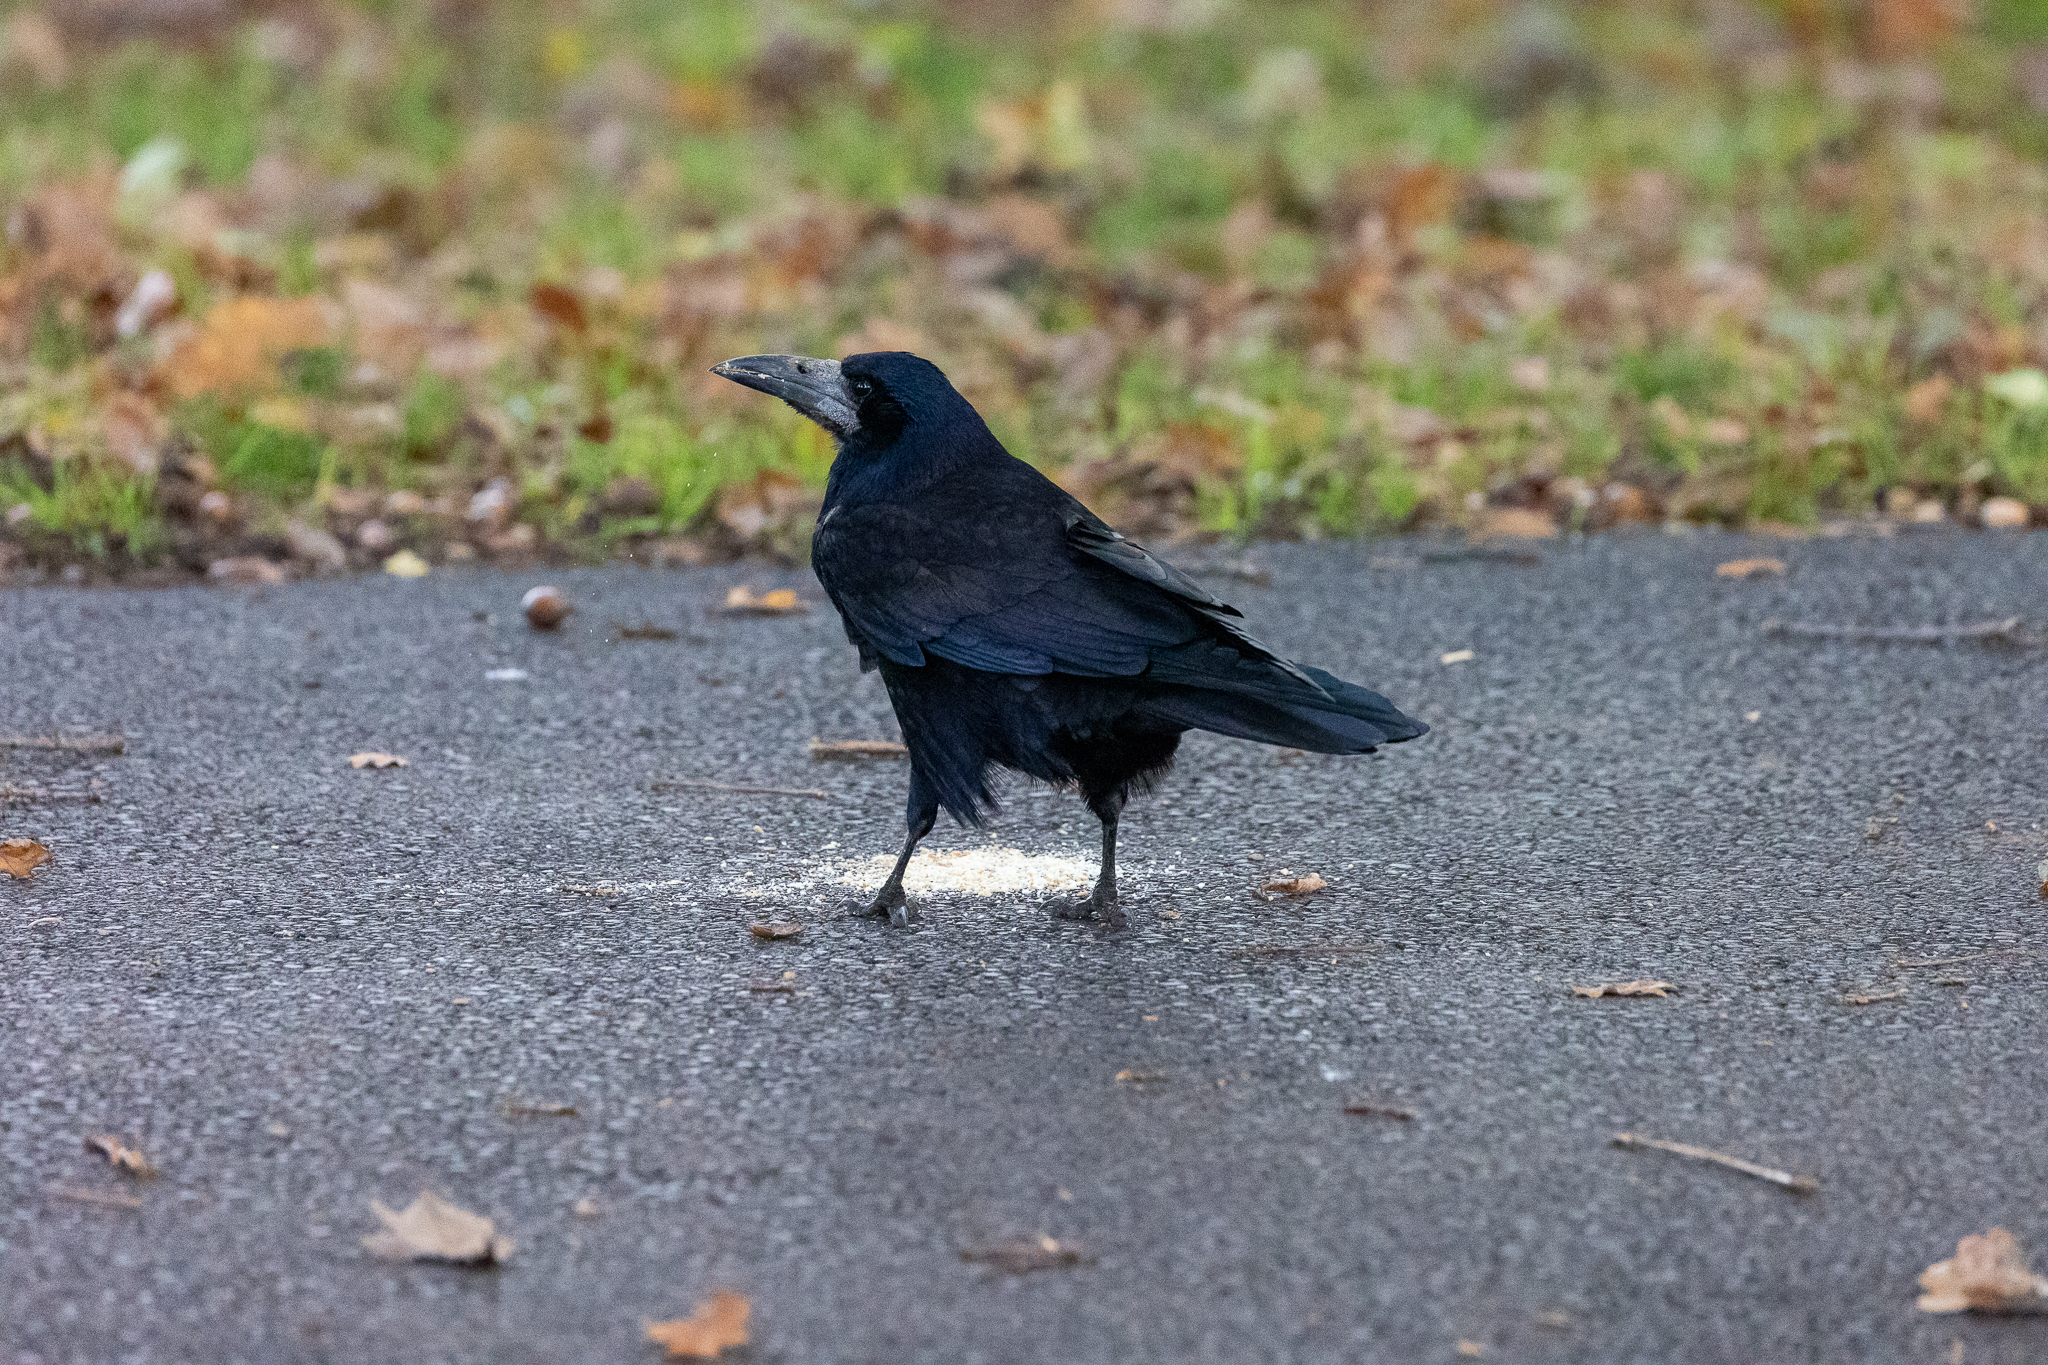 Rook eating some scattered food on the ground